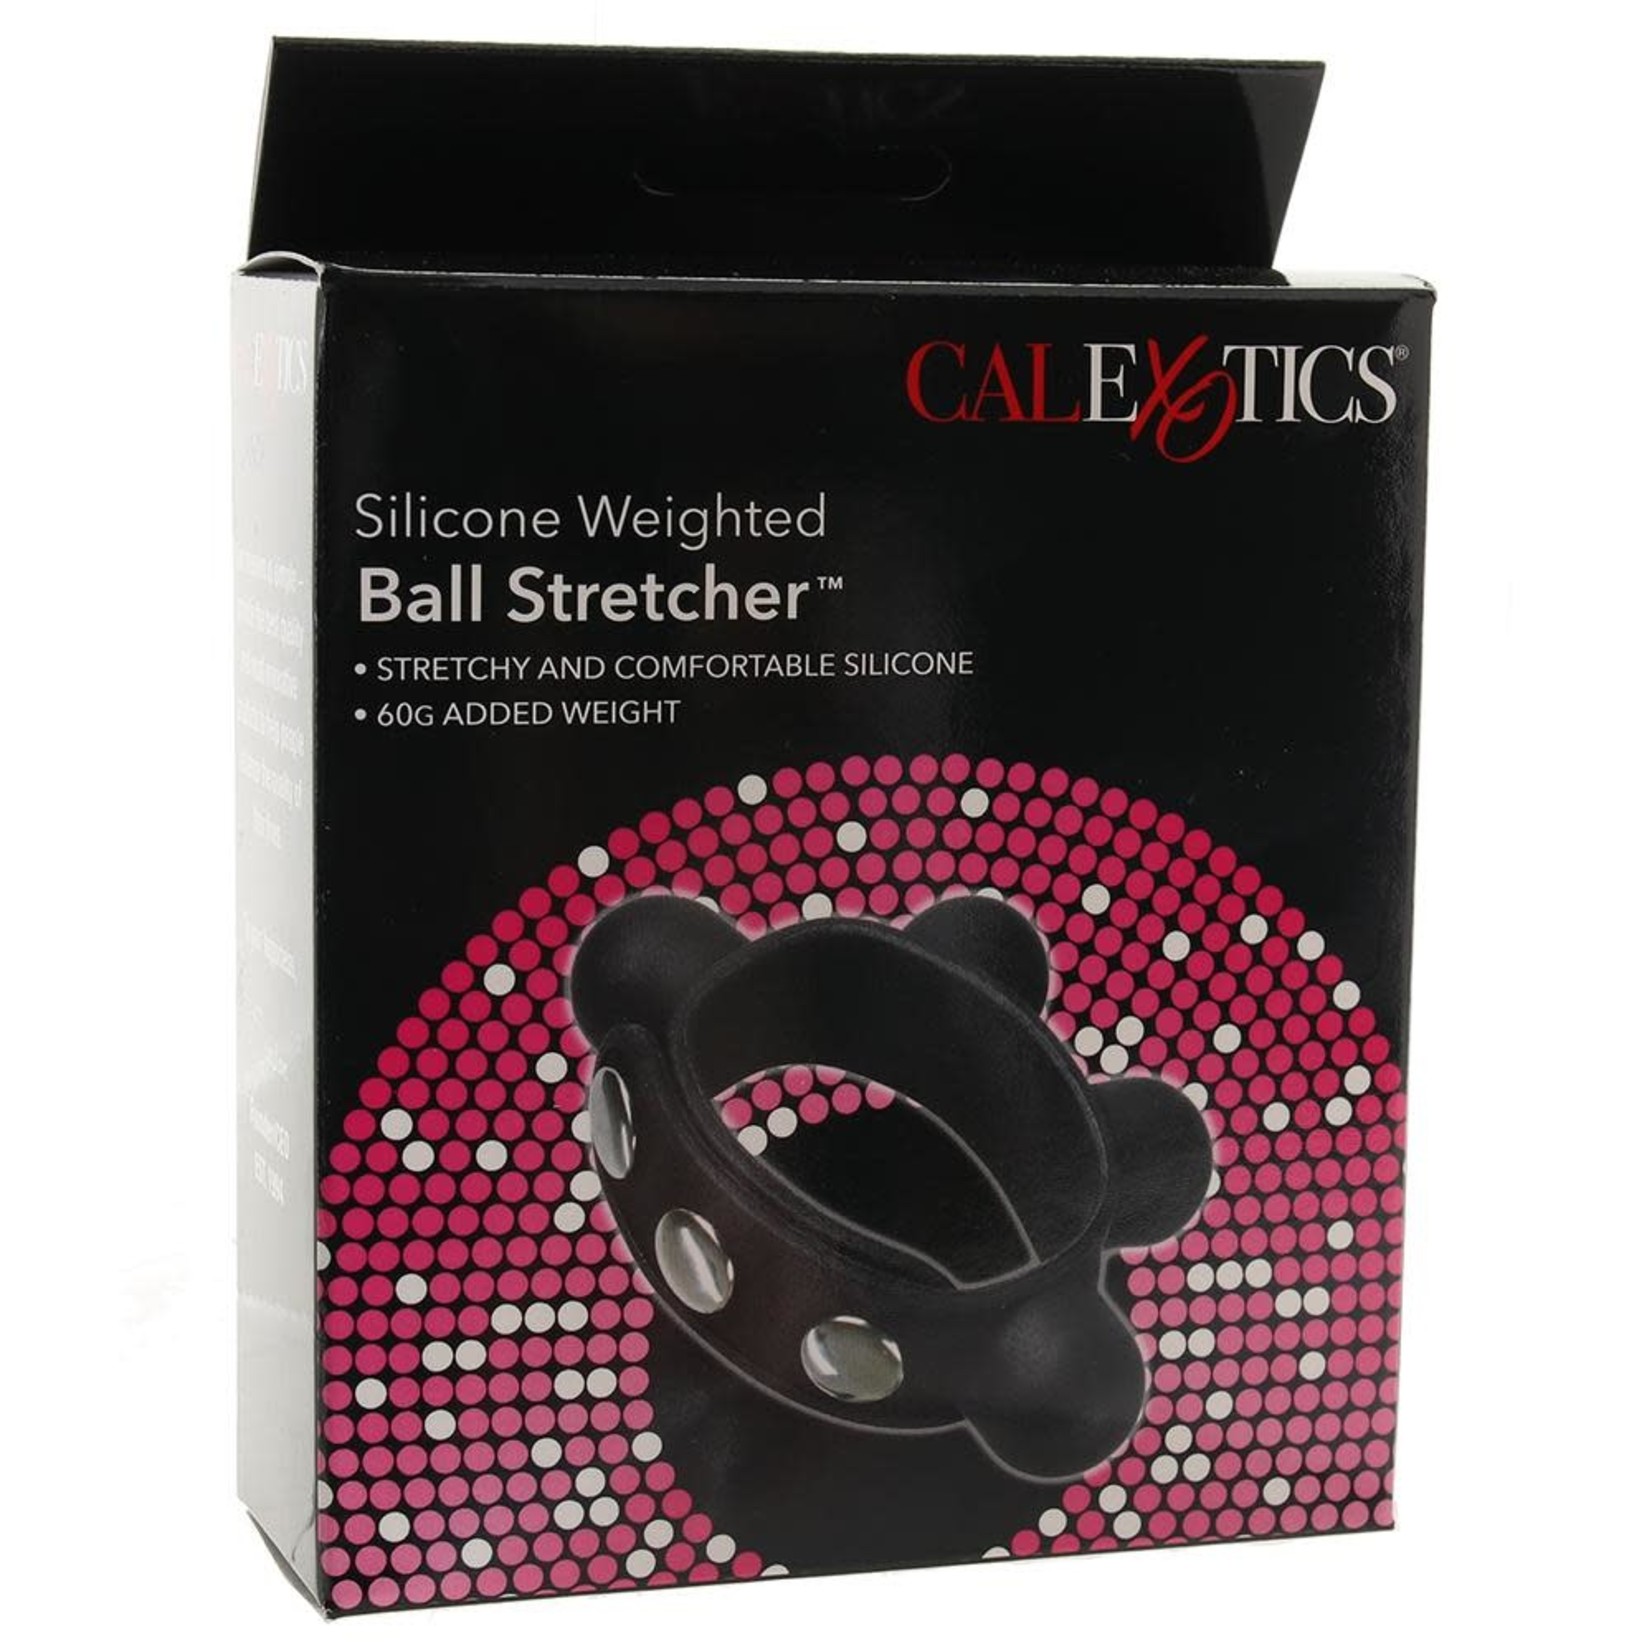 CALEXOTICS SILICONE WEIGHTED BALL STRETCHER